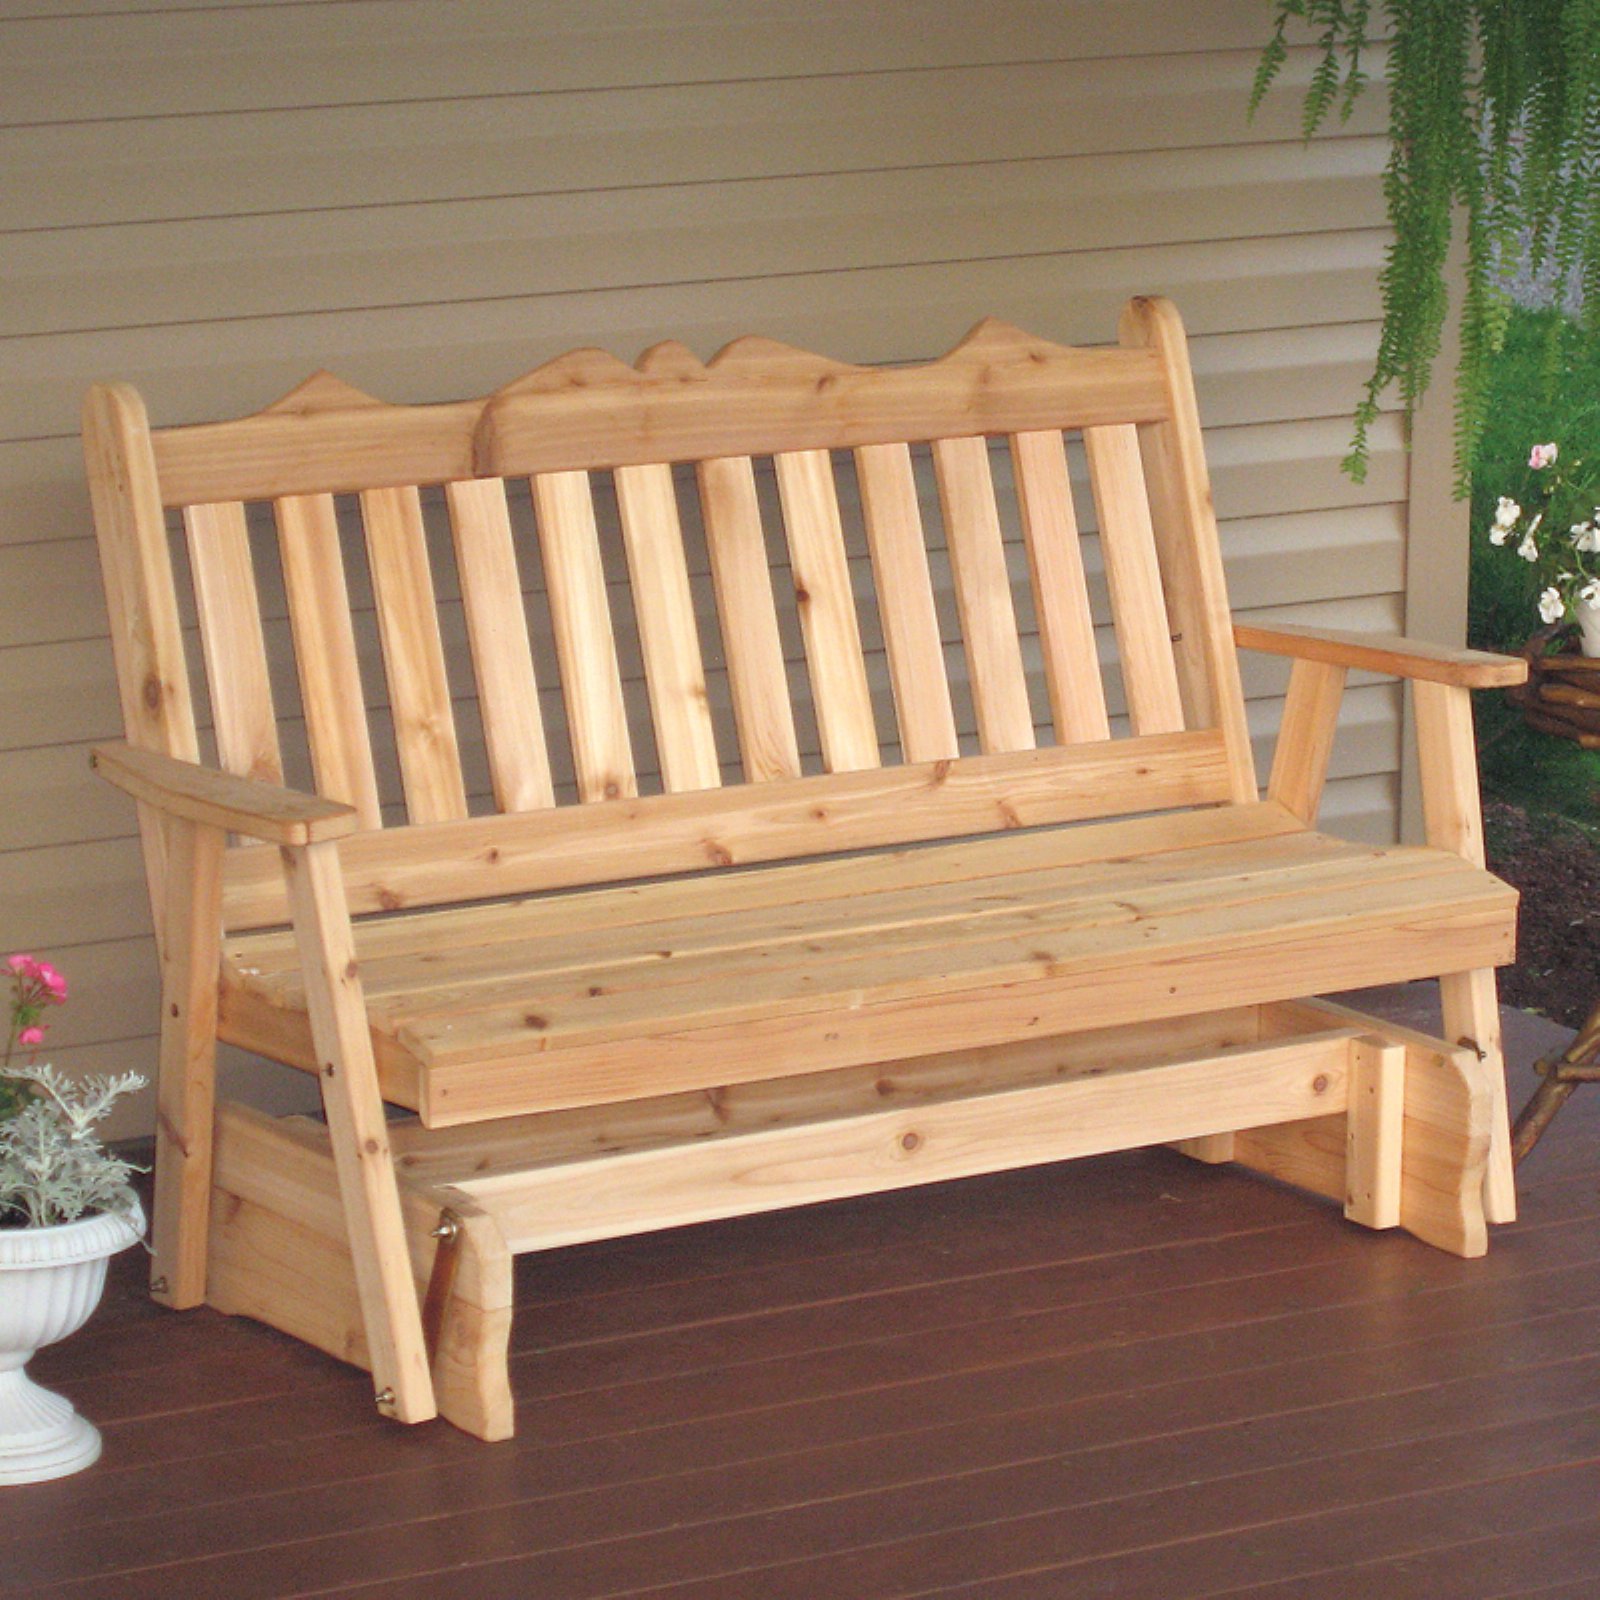 A &amp; L Furniture Western Red Cedar Royal English Outdoor Loveseat Glider - image 1 of 7